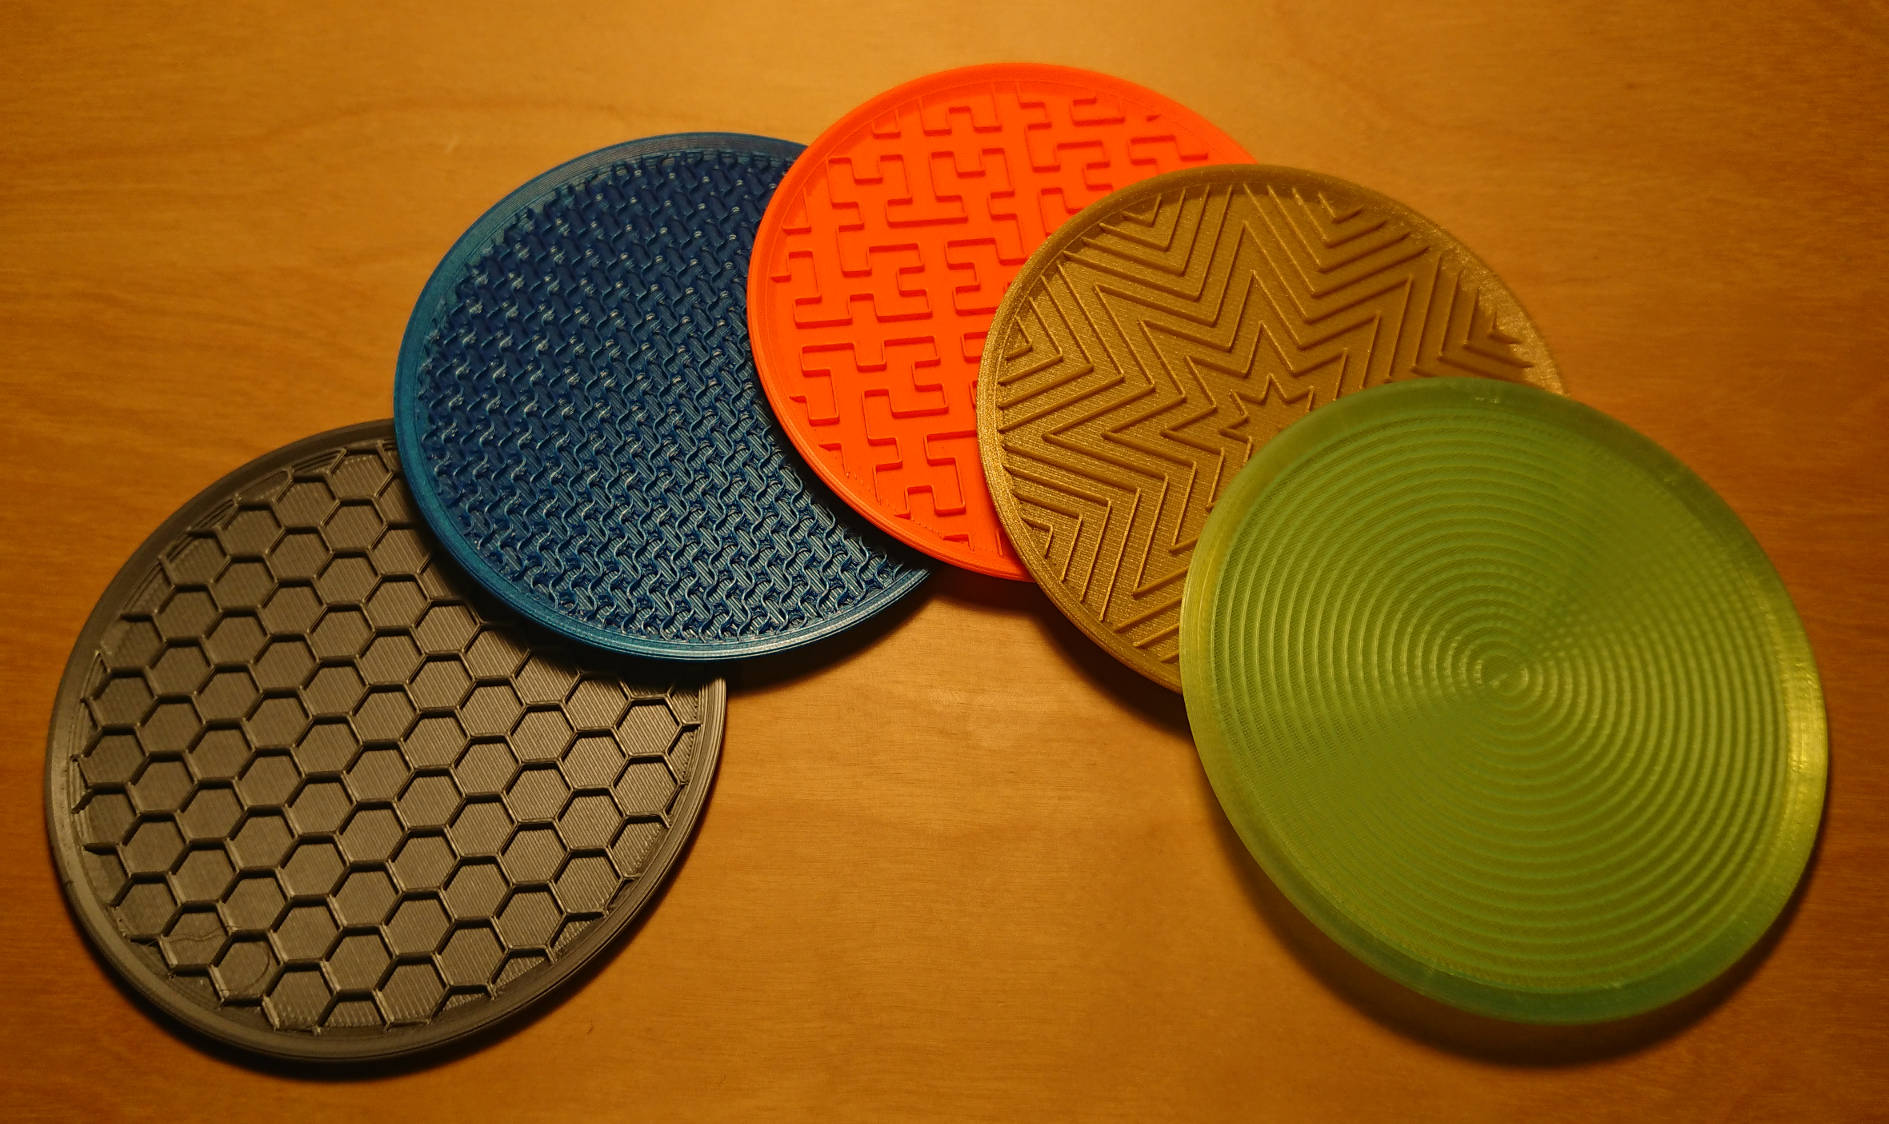 Five infill coasters, printed with different materials and patterns